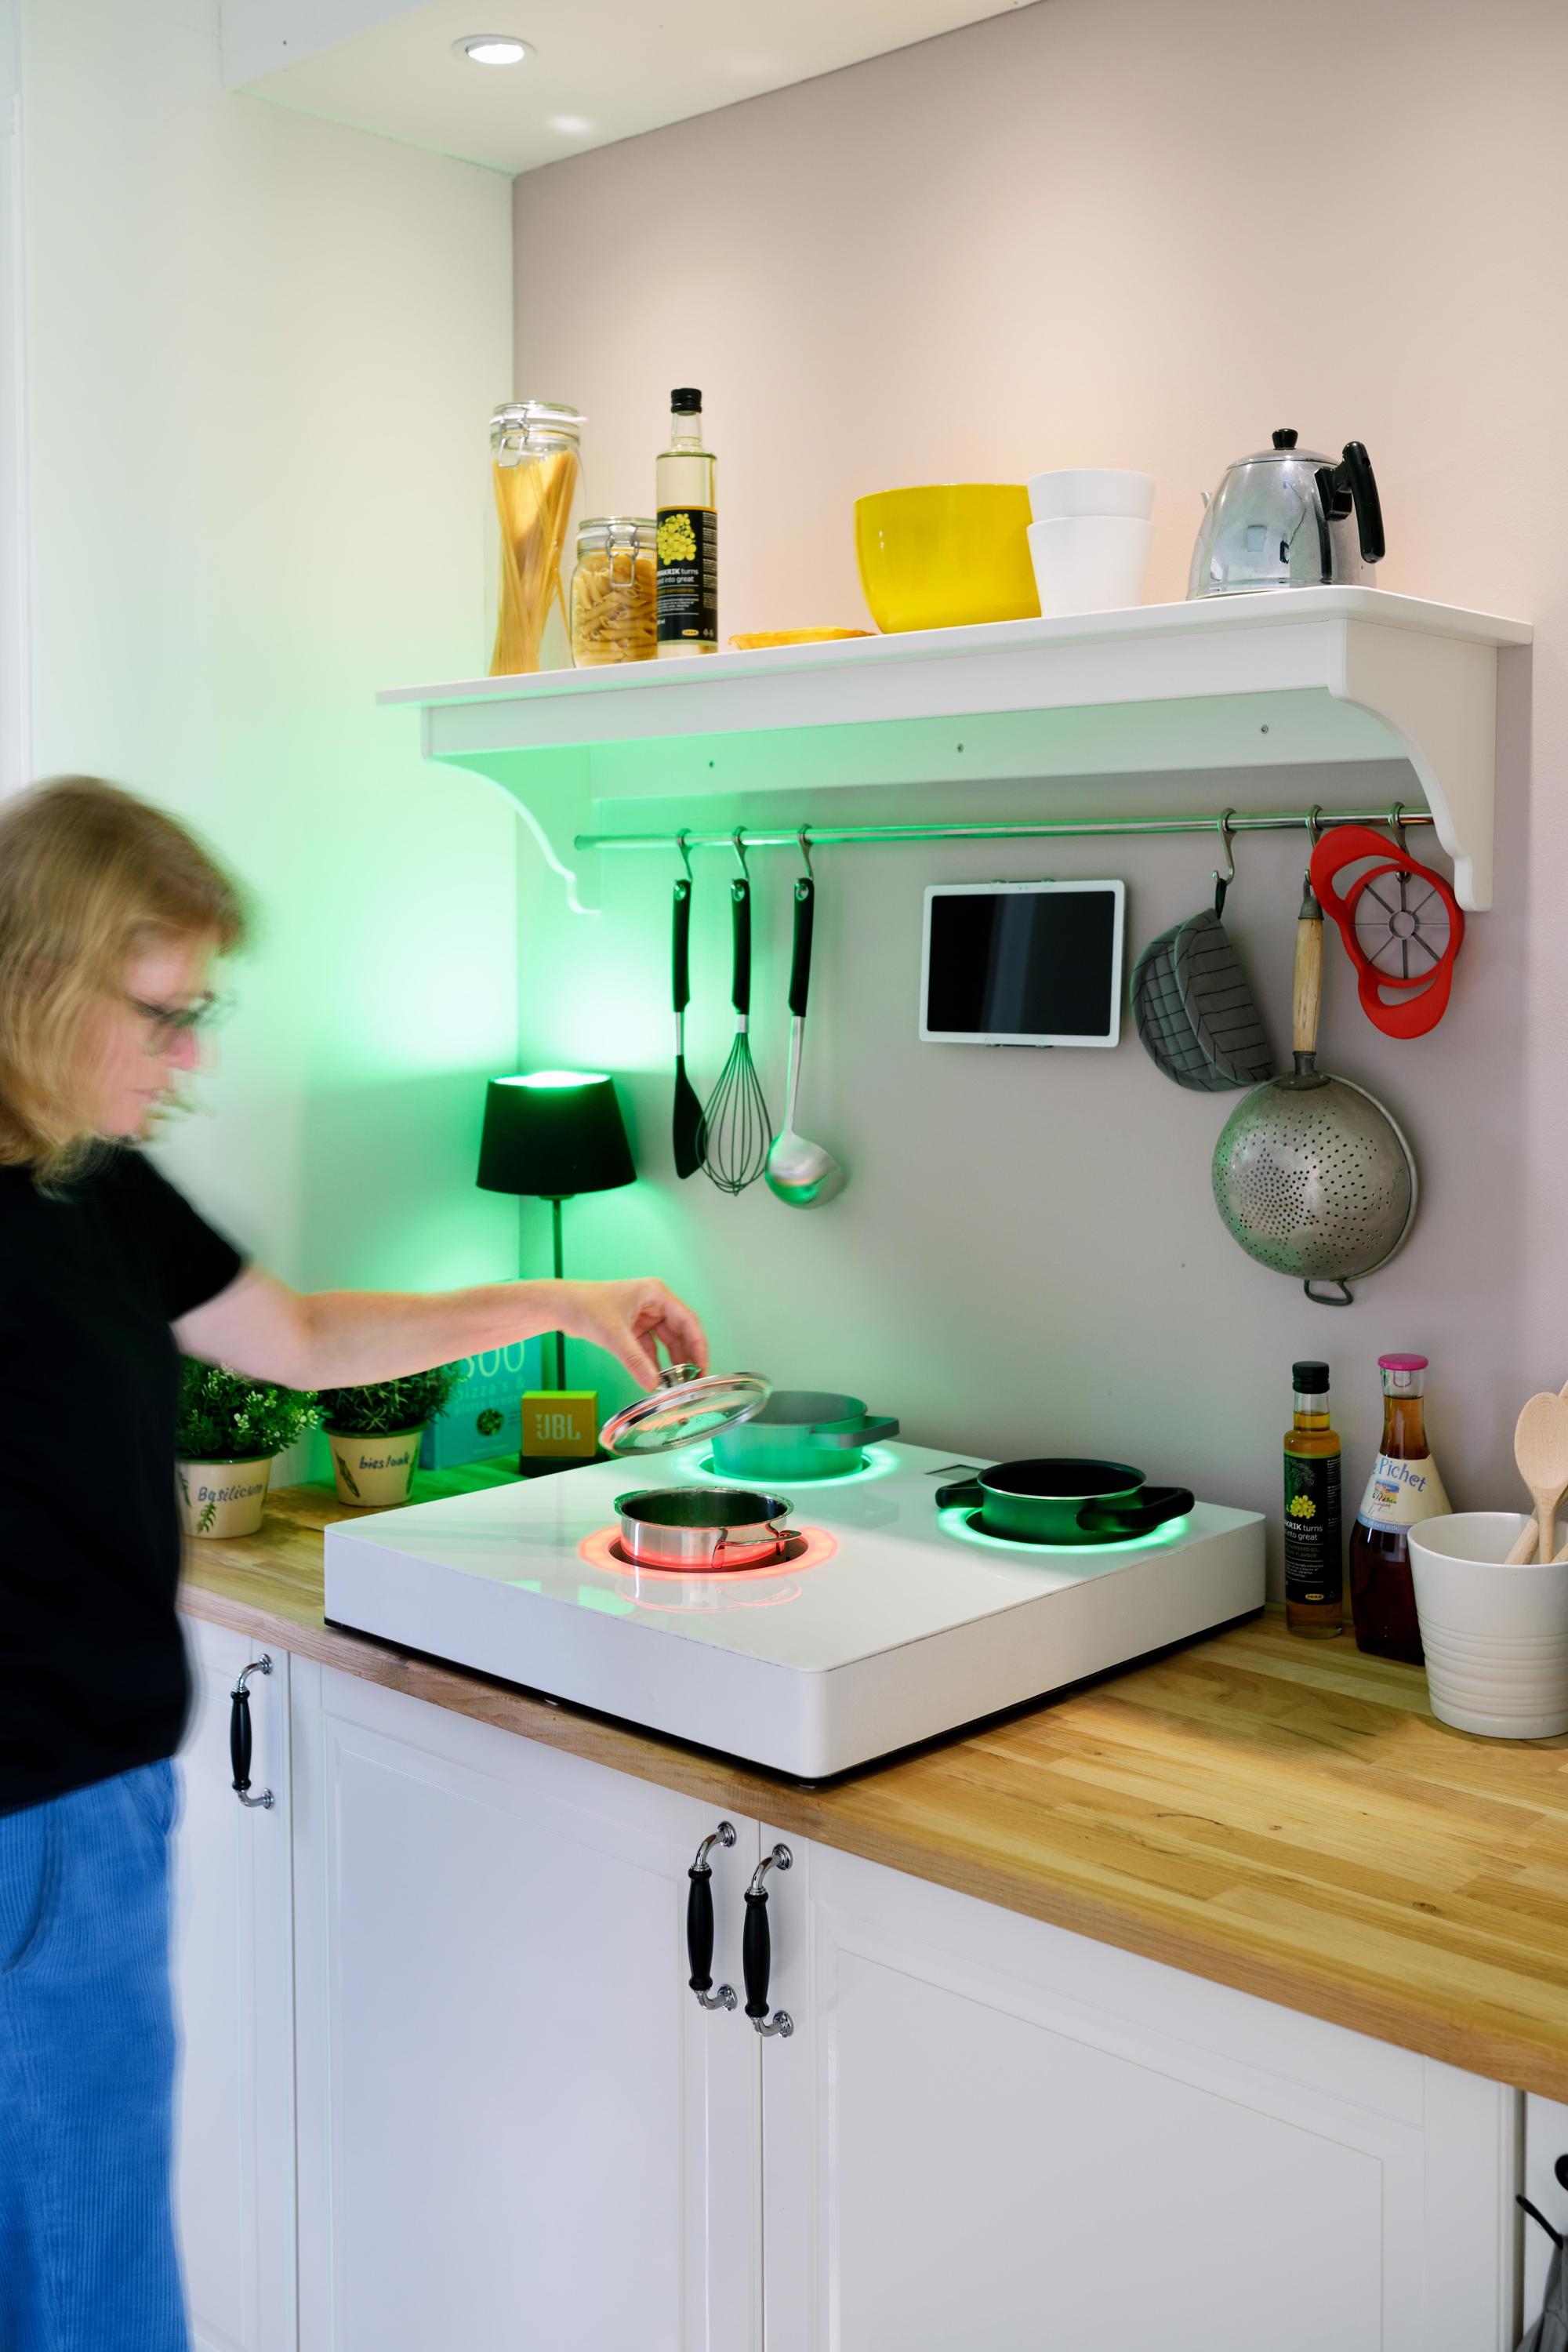 A smart cooking appliance in the empathic home